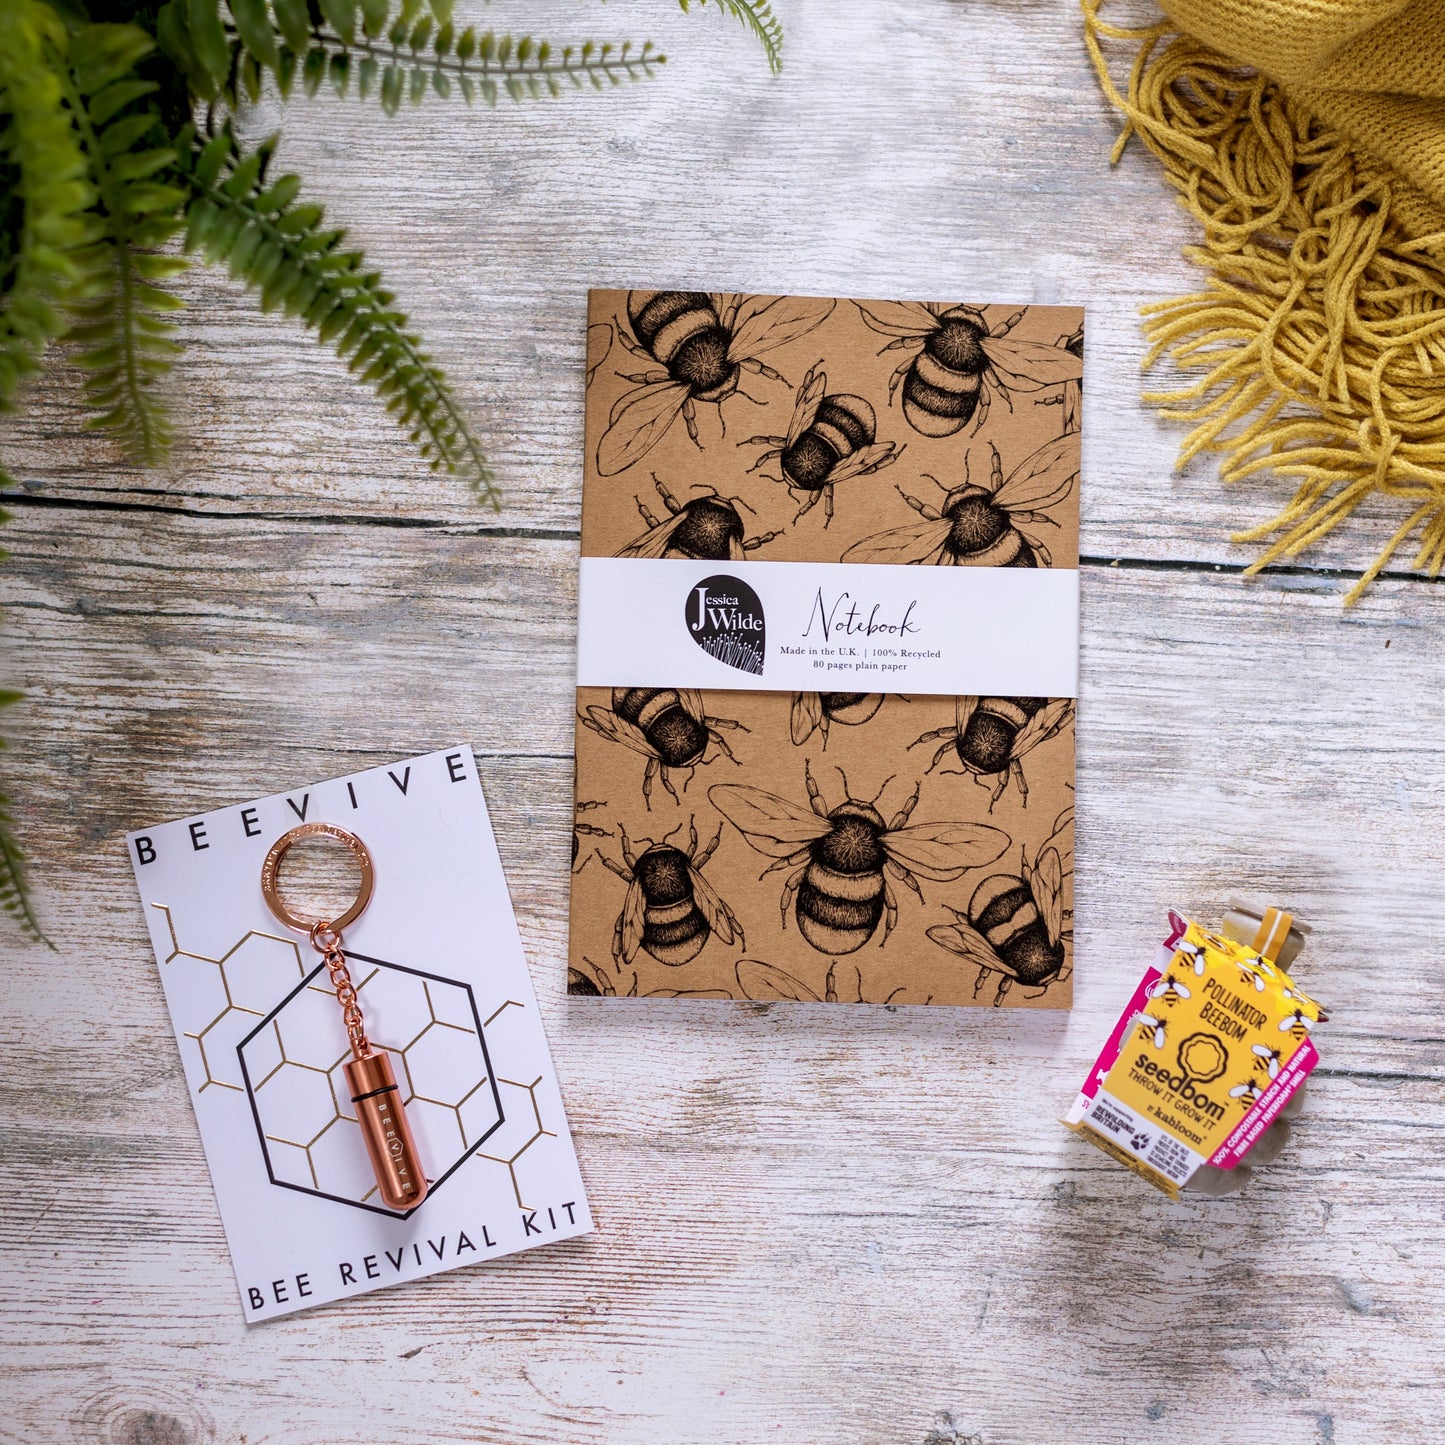 The Bee Kind Gift Box - Gift And Give Back